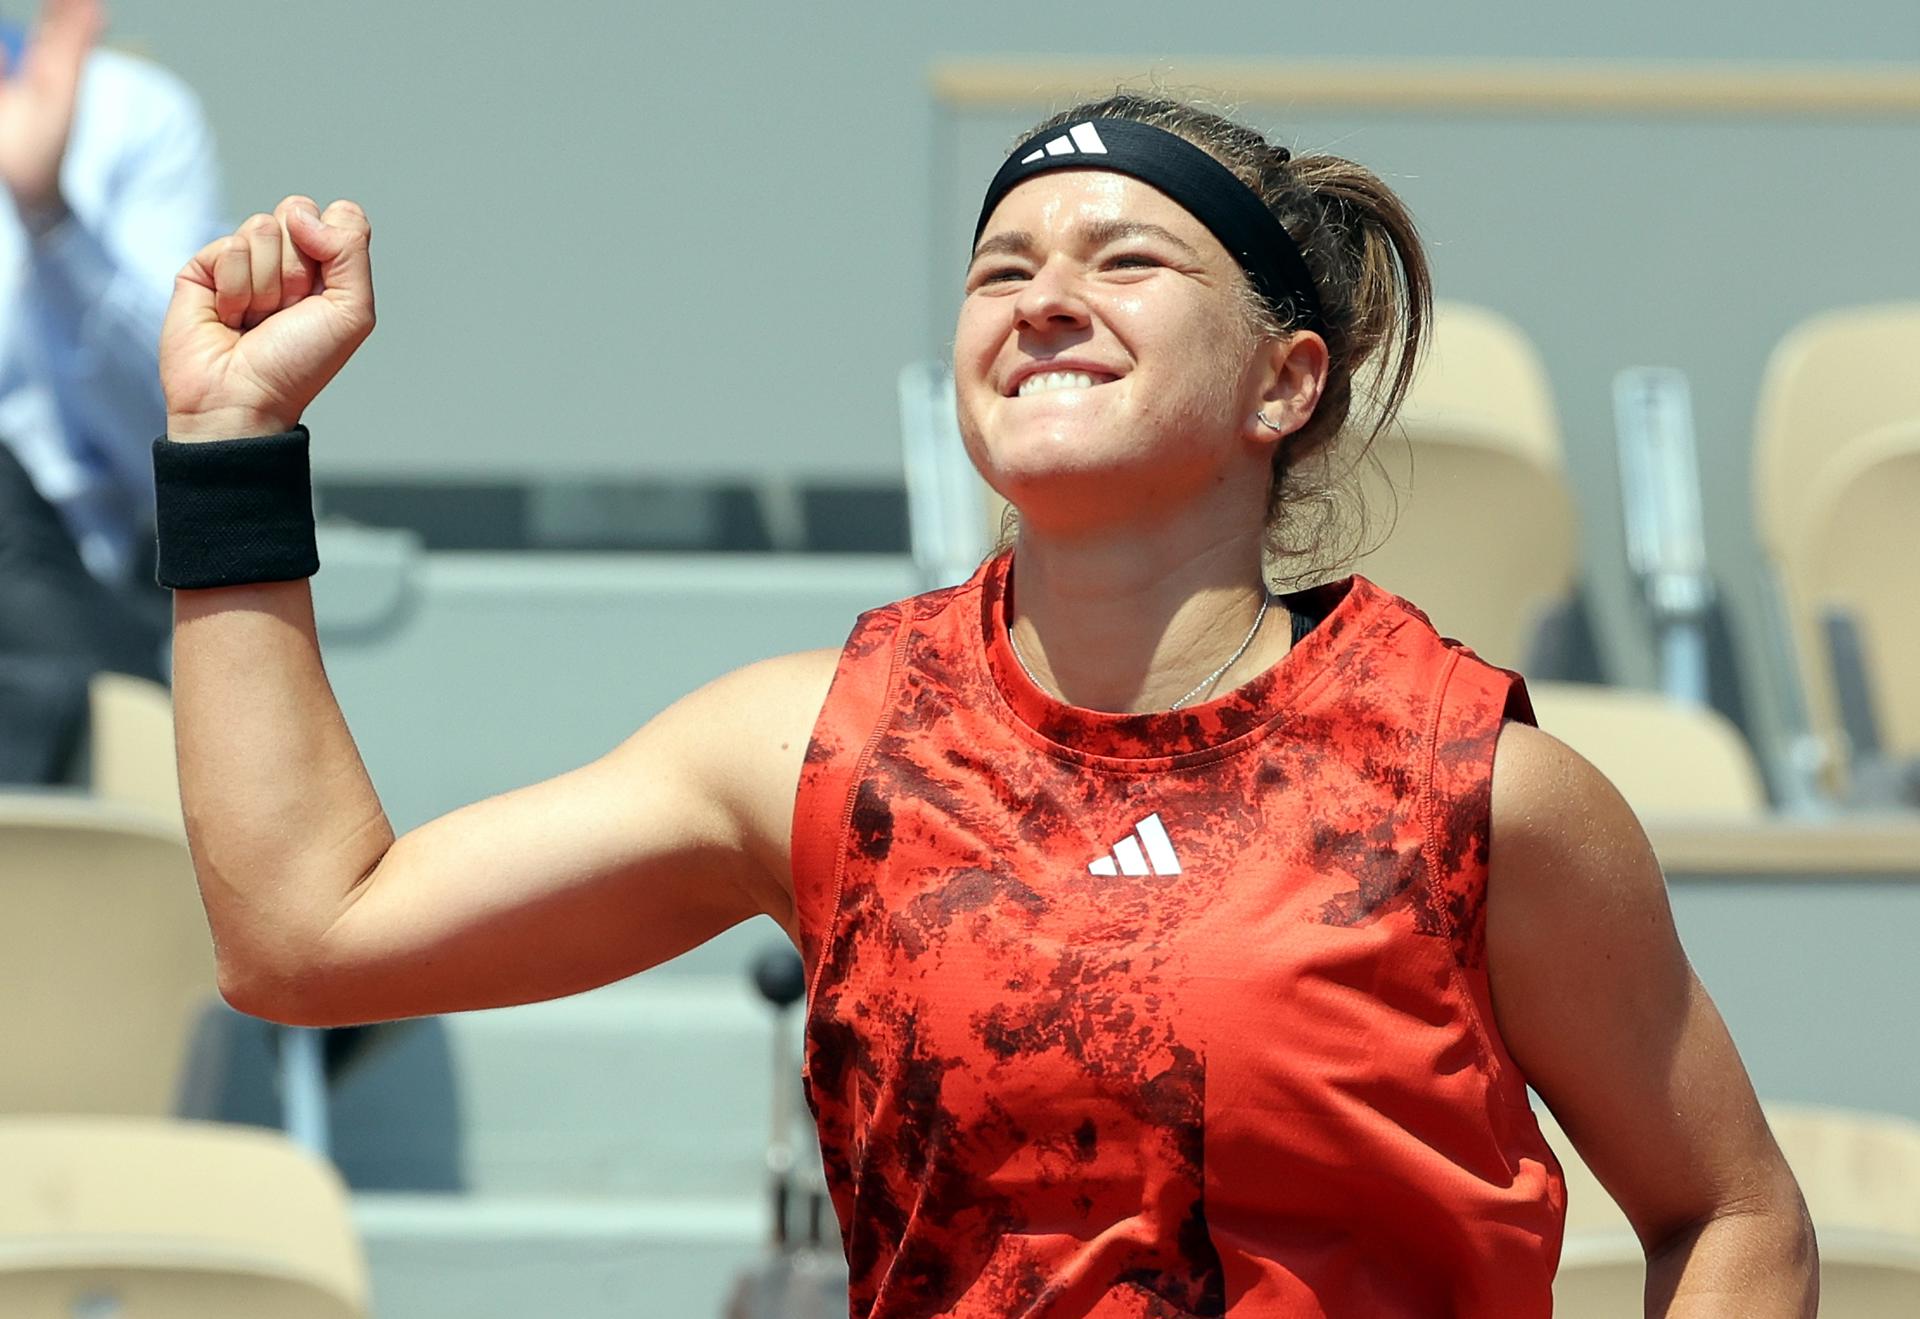 Karolina Muchova of the Czech Republic reacts after defeating Anastasia Pavlyuchenkova of Russia 7-5, 6-2 in French Open quarterfinal action on 6 June 2023 in Paris, France. EFE/EPA/TERESA SUAREZ
